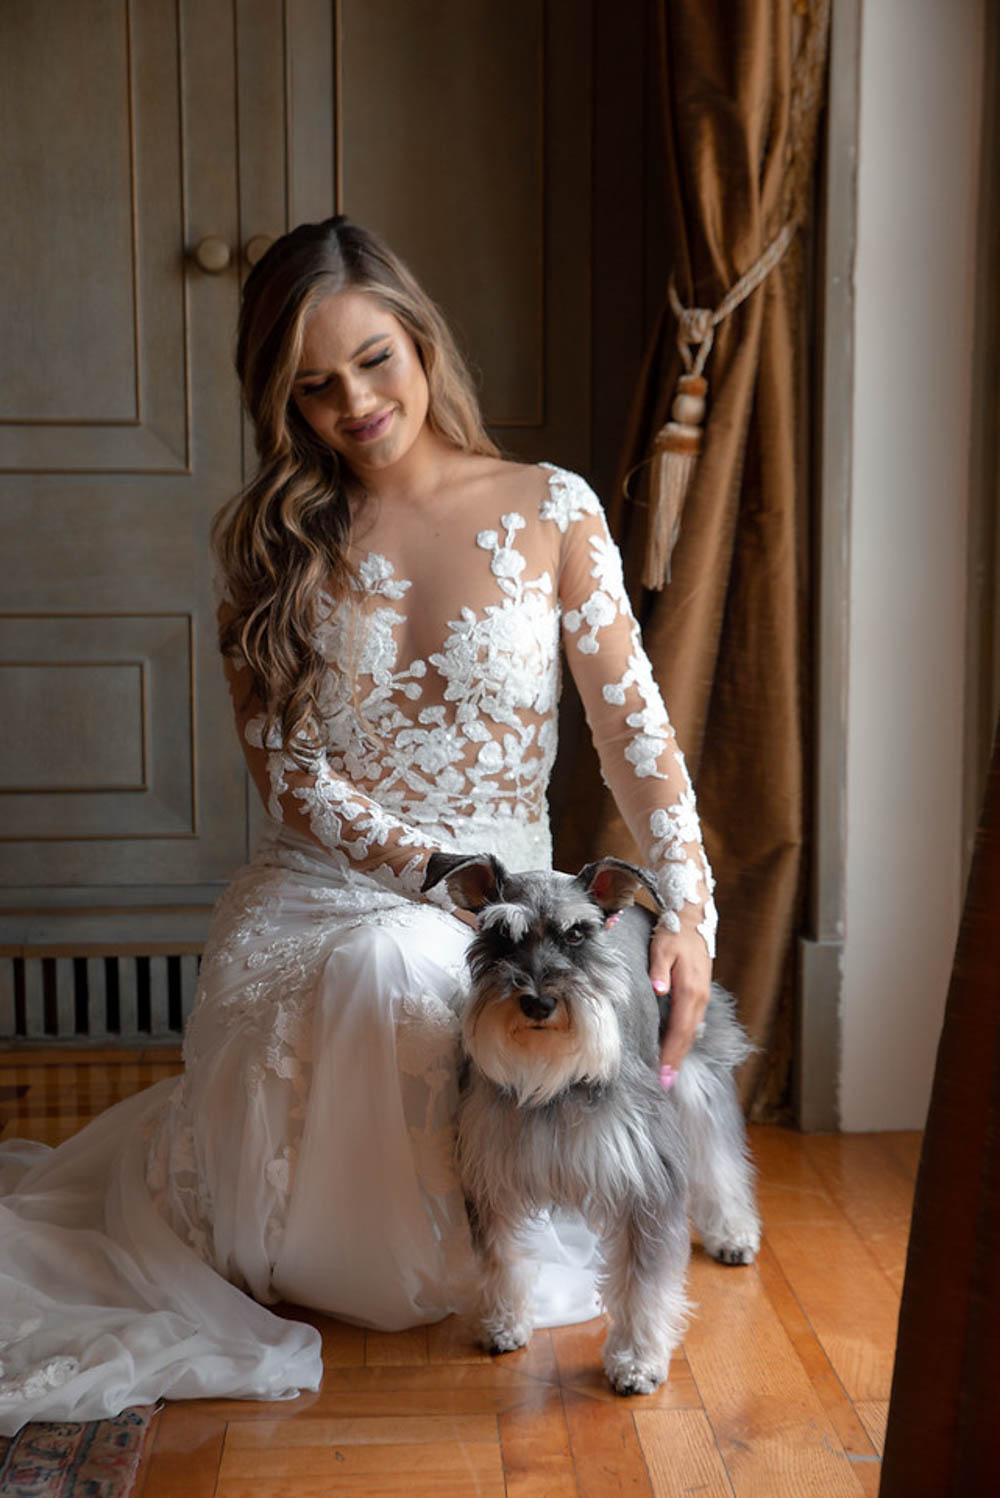 Angelina + Krista: Upscale glamorous lesbian wedding at the renowned Versace mansion in Miami Beach, Florida Suzanne Delawar Studios bride and dog